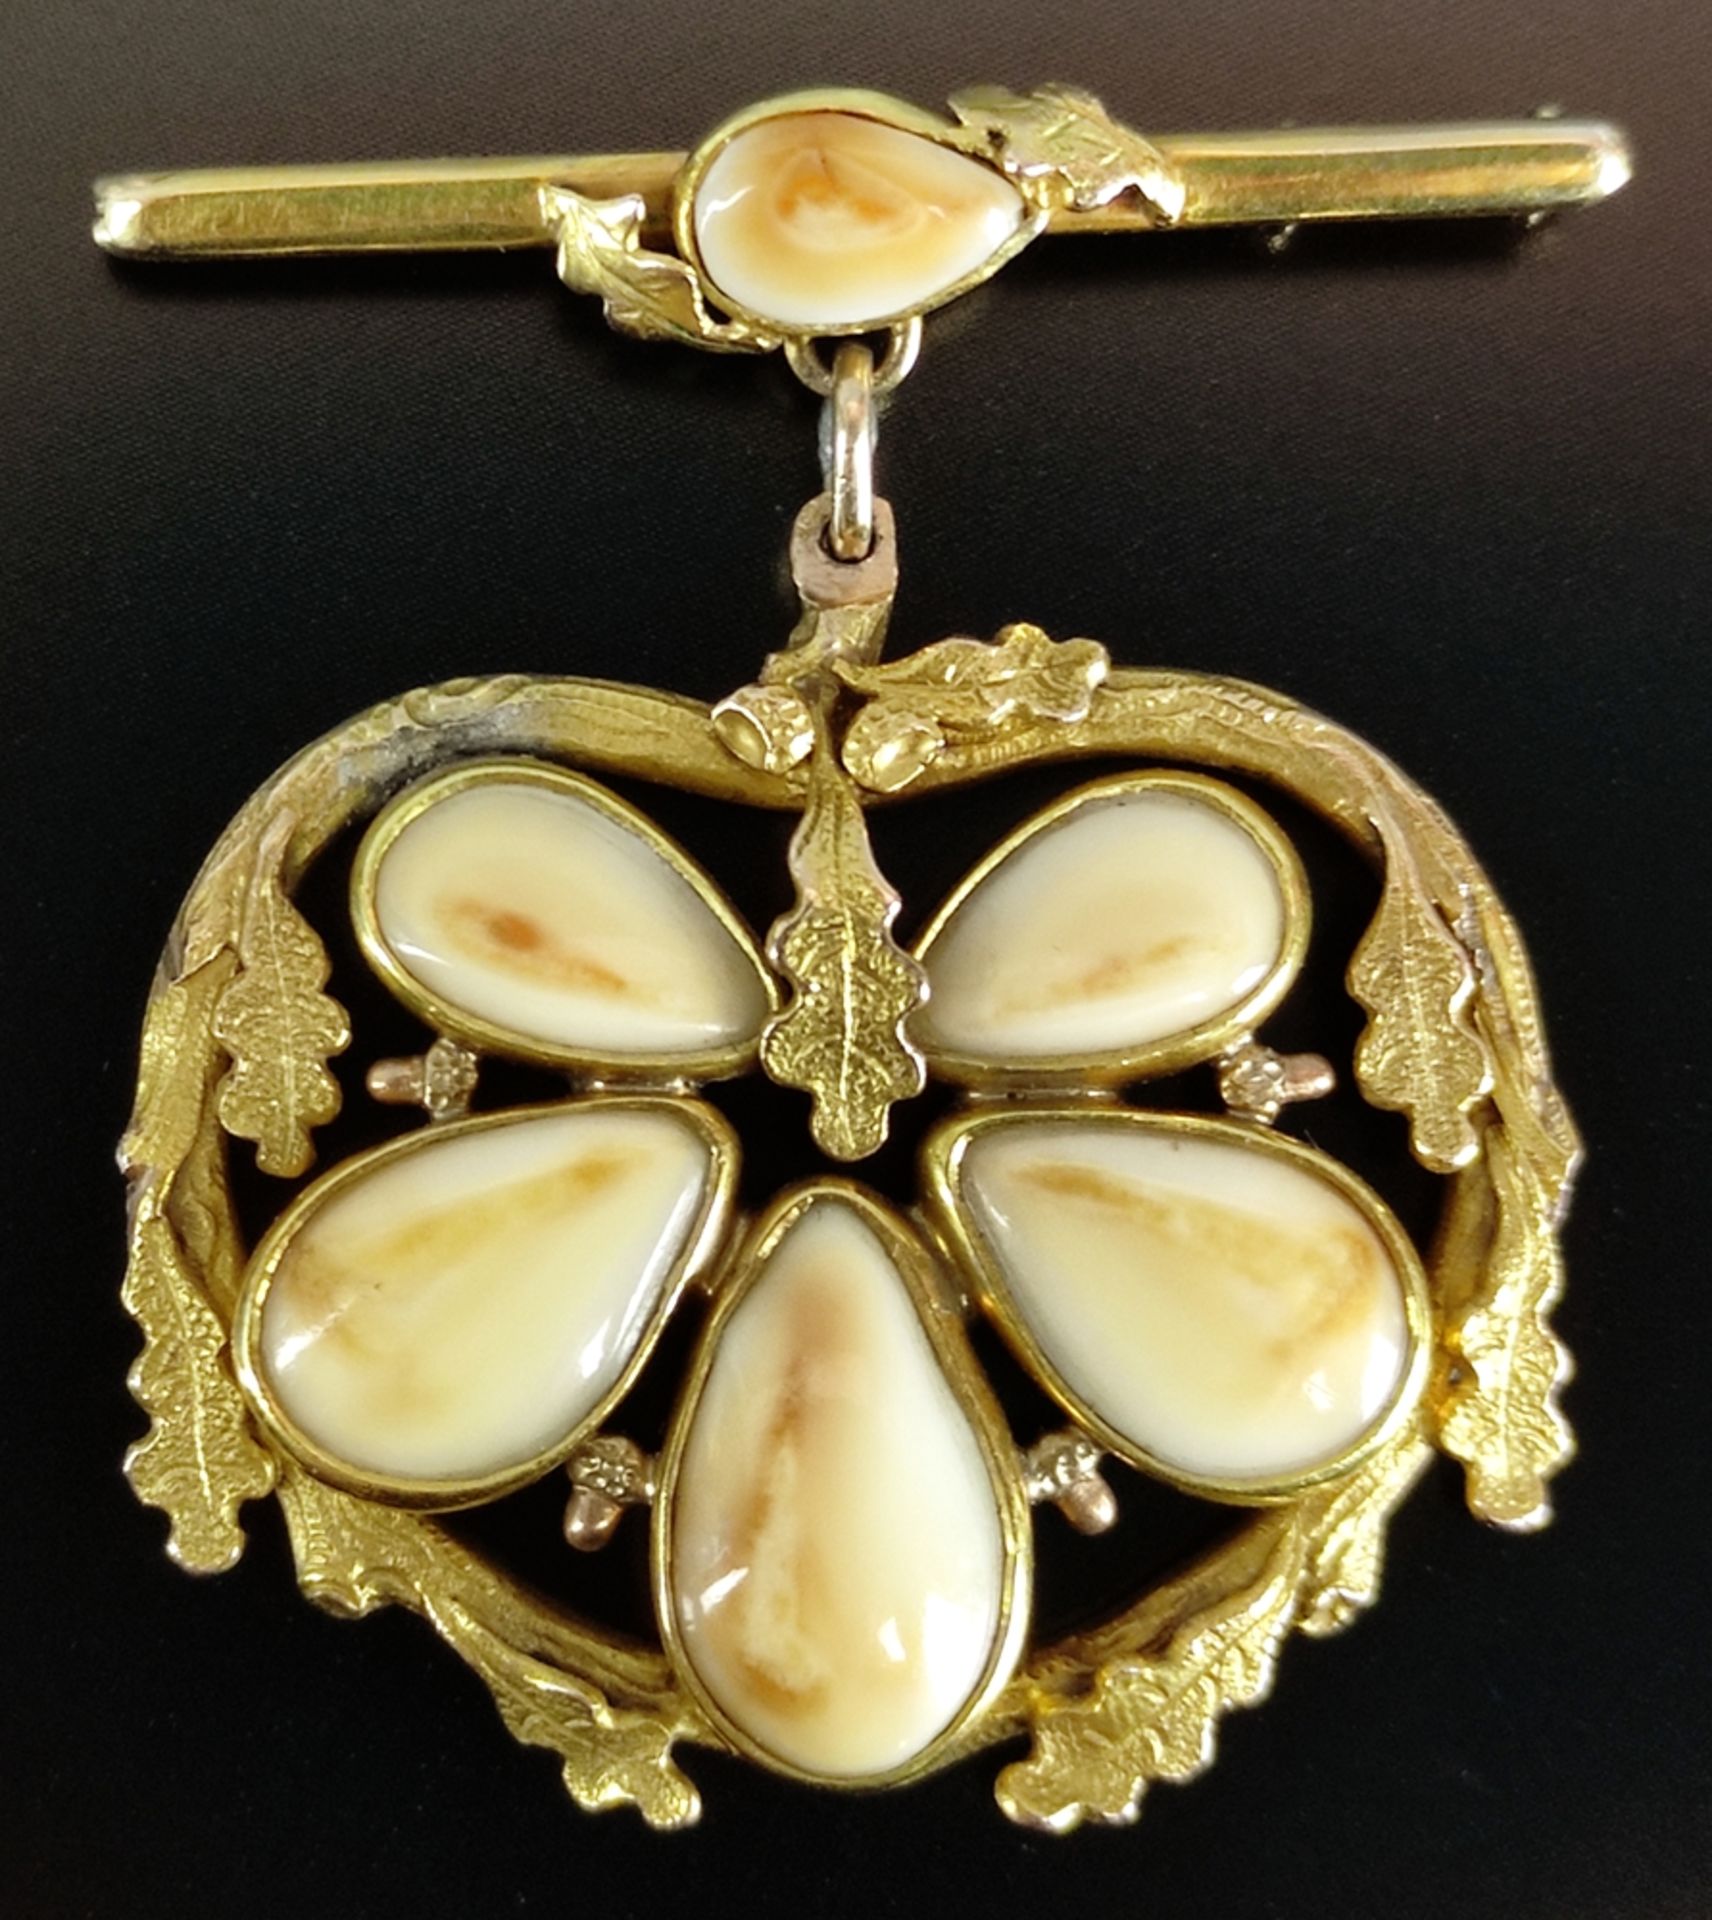 Grandl gold brooch, bar brooch with central set stag grandl as well as large suspension of 5